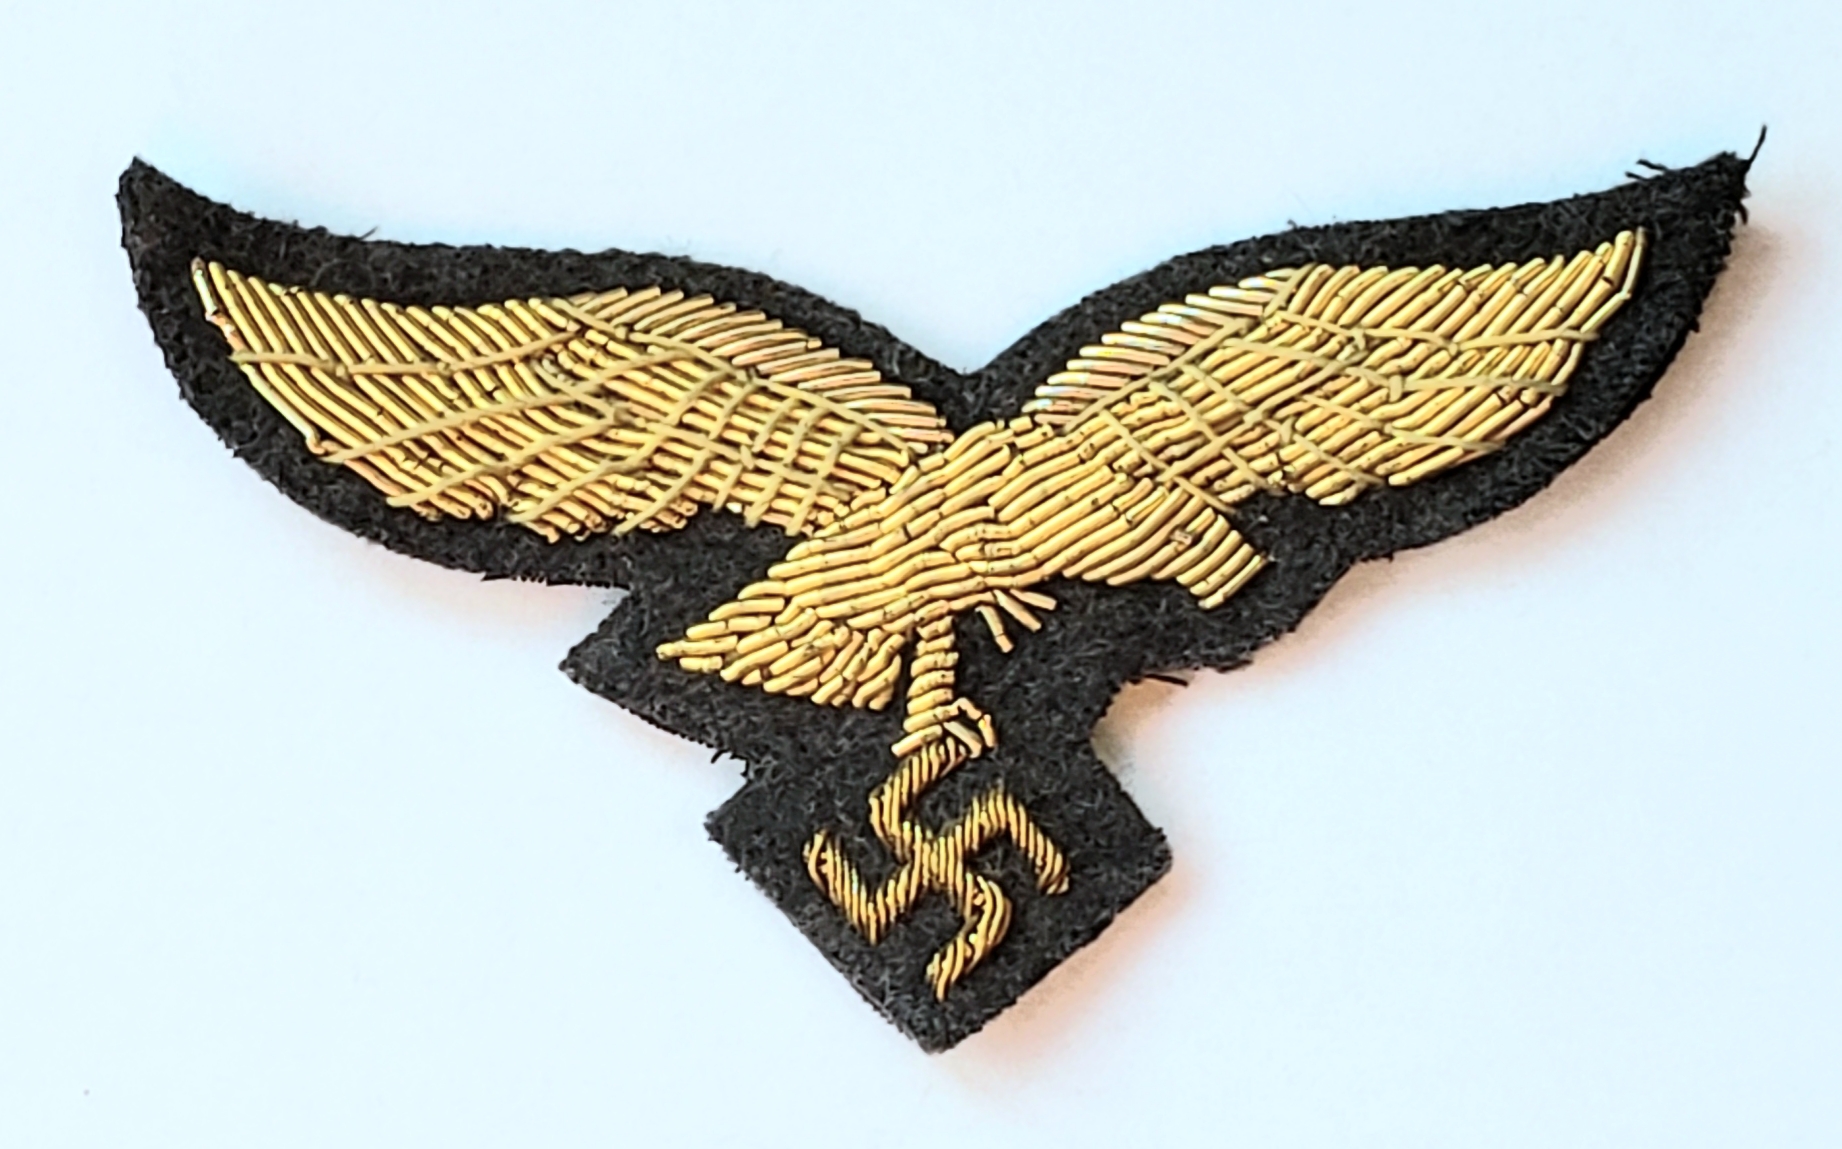 Luftwaffe Badges , insignia,  related items. 